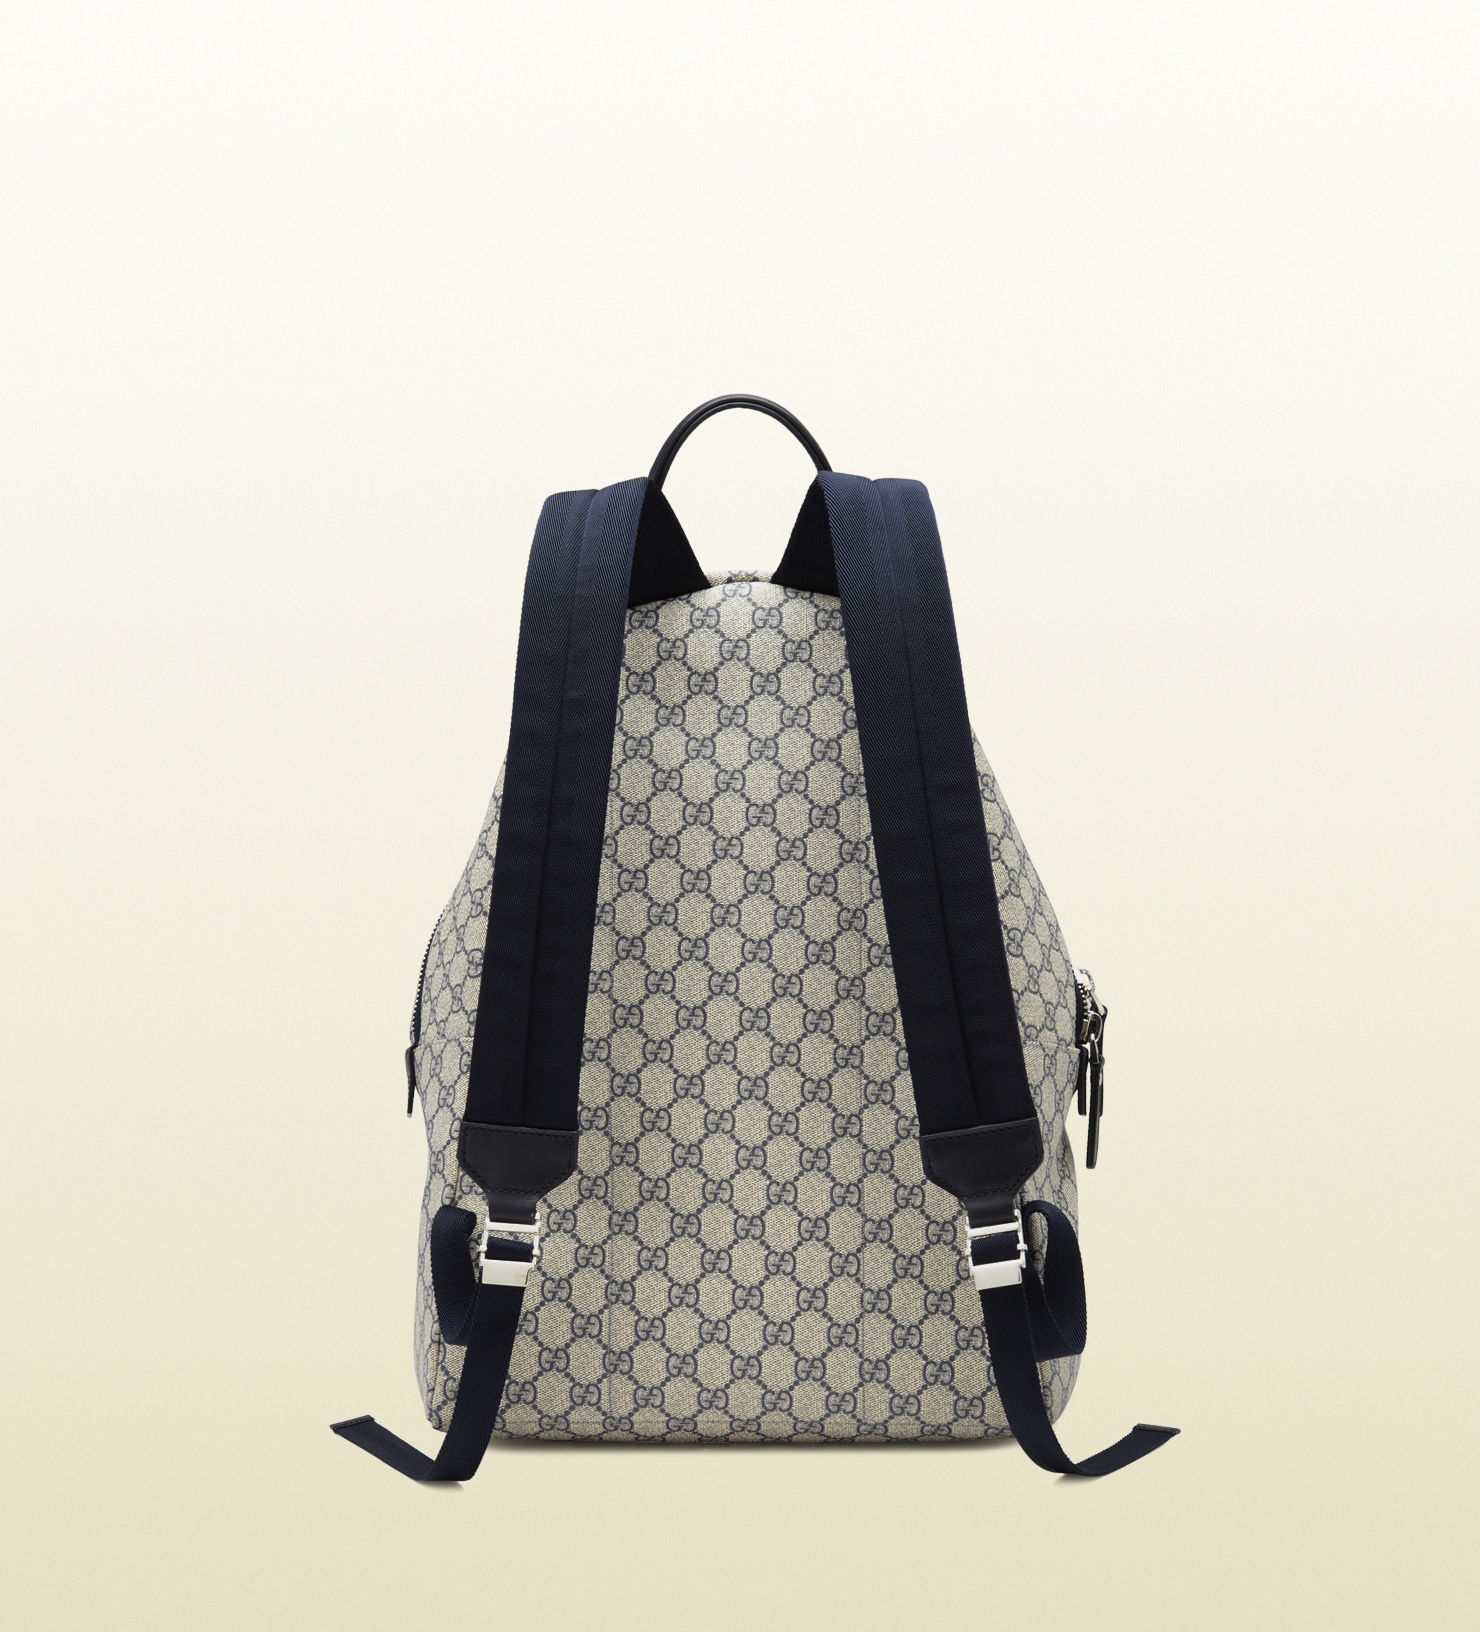 Lyst - Gucci Gg Supreme Canvas Zip Backpack in Gray for Men